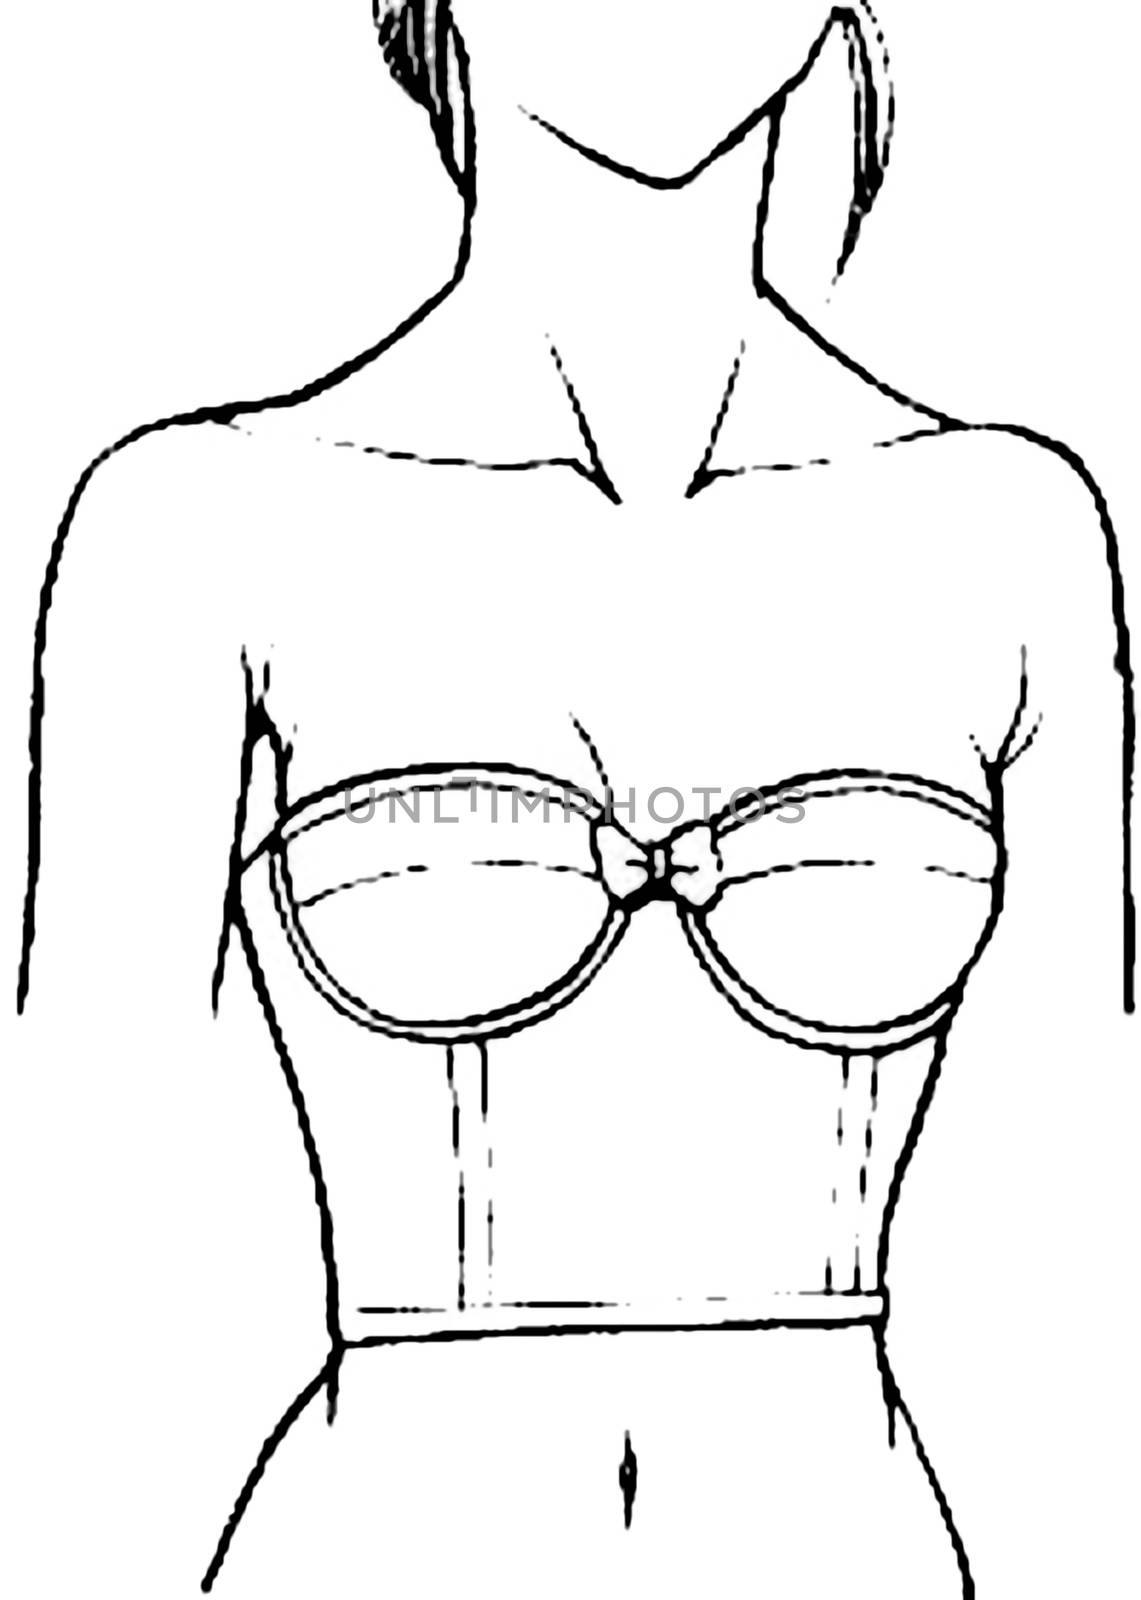 Tutorial of drawing a female body. Drawing the human body, step by step lessons. Female breast drawing tutorial. Drawing a woman's body with an emphasis on breasts.